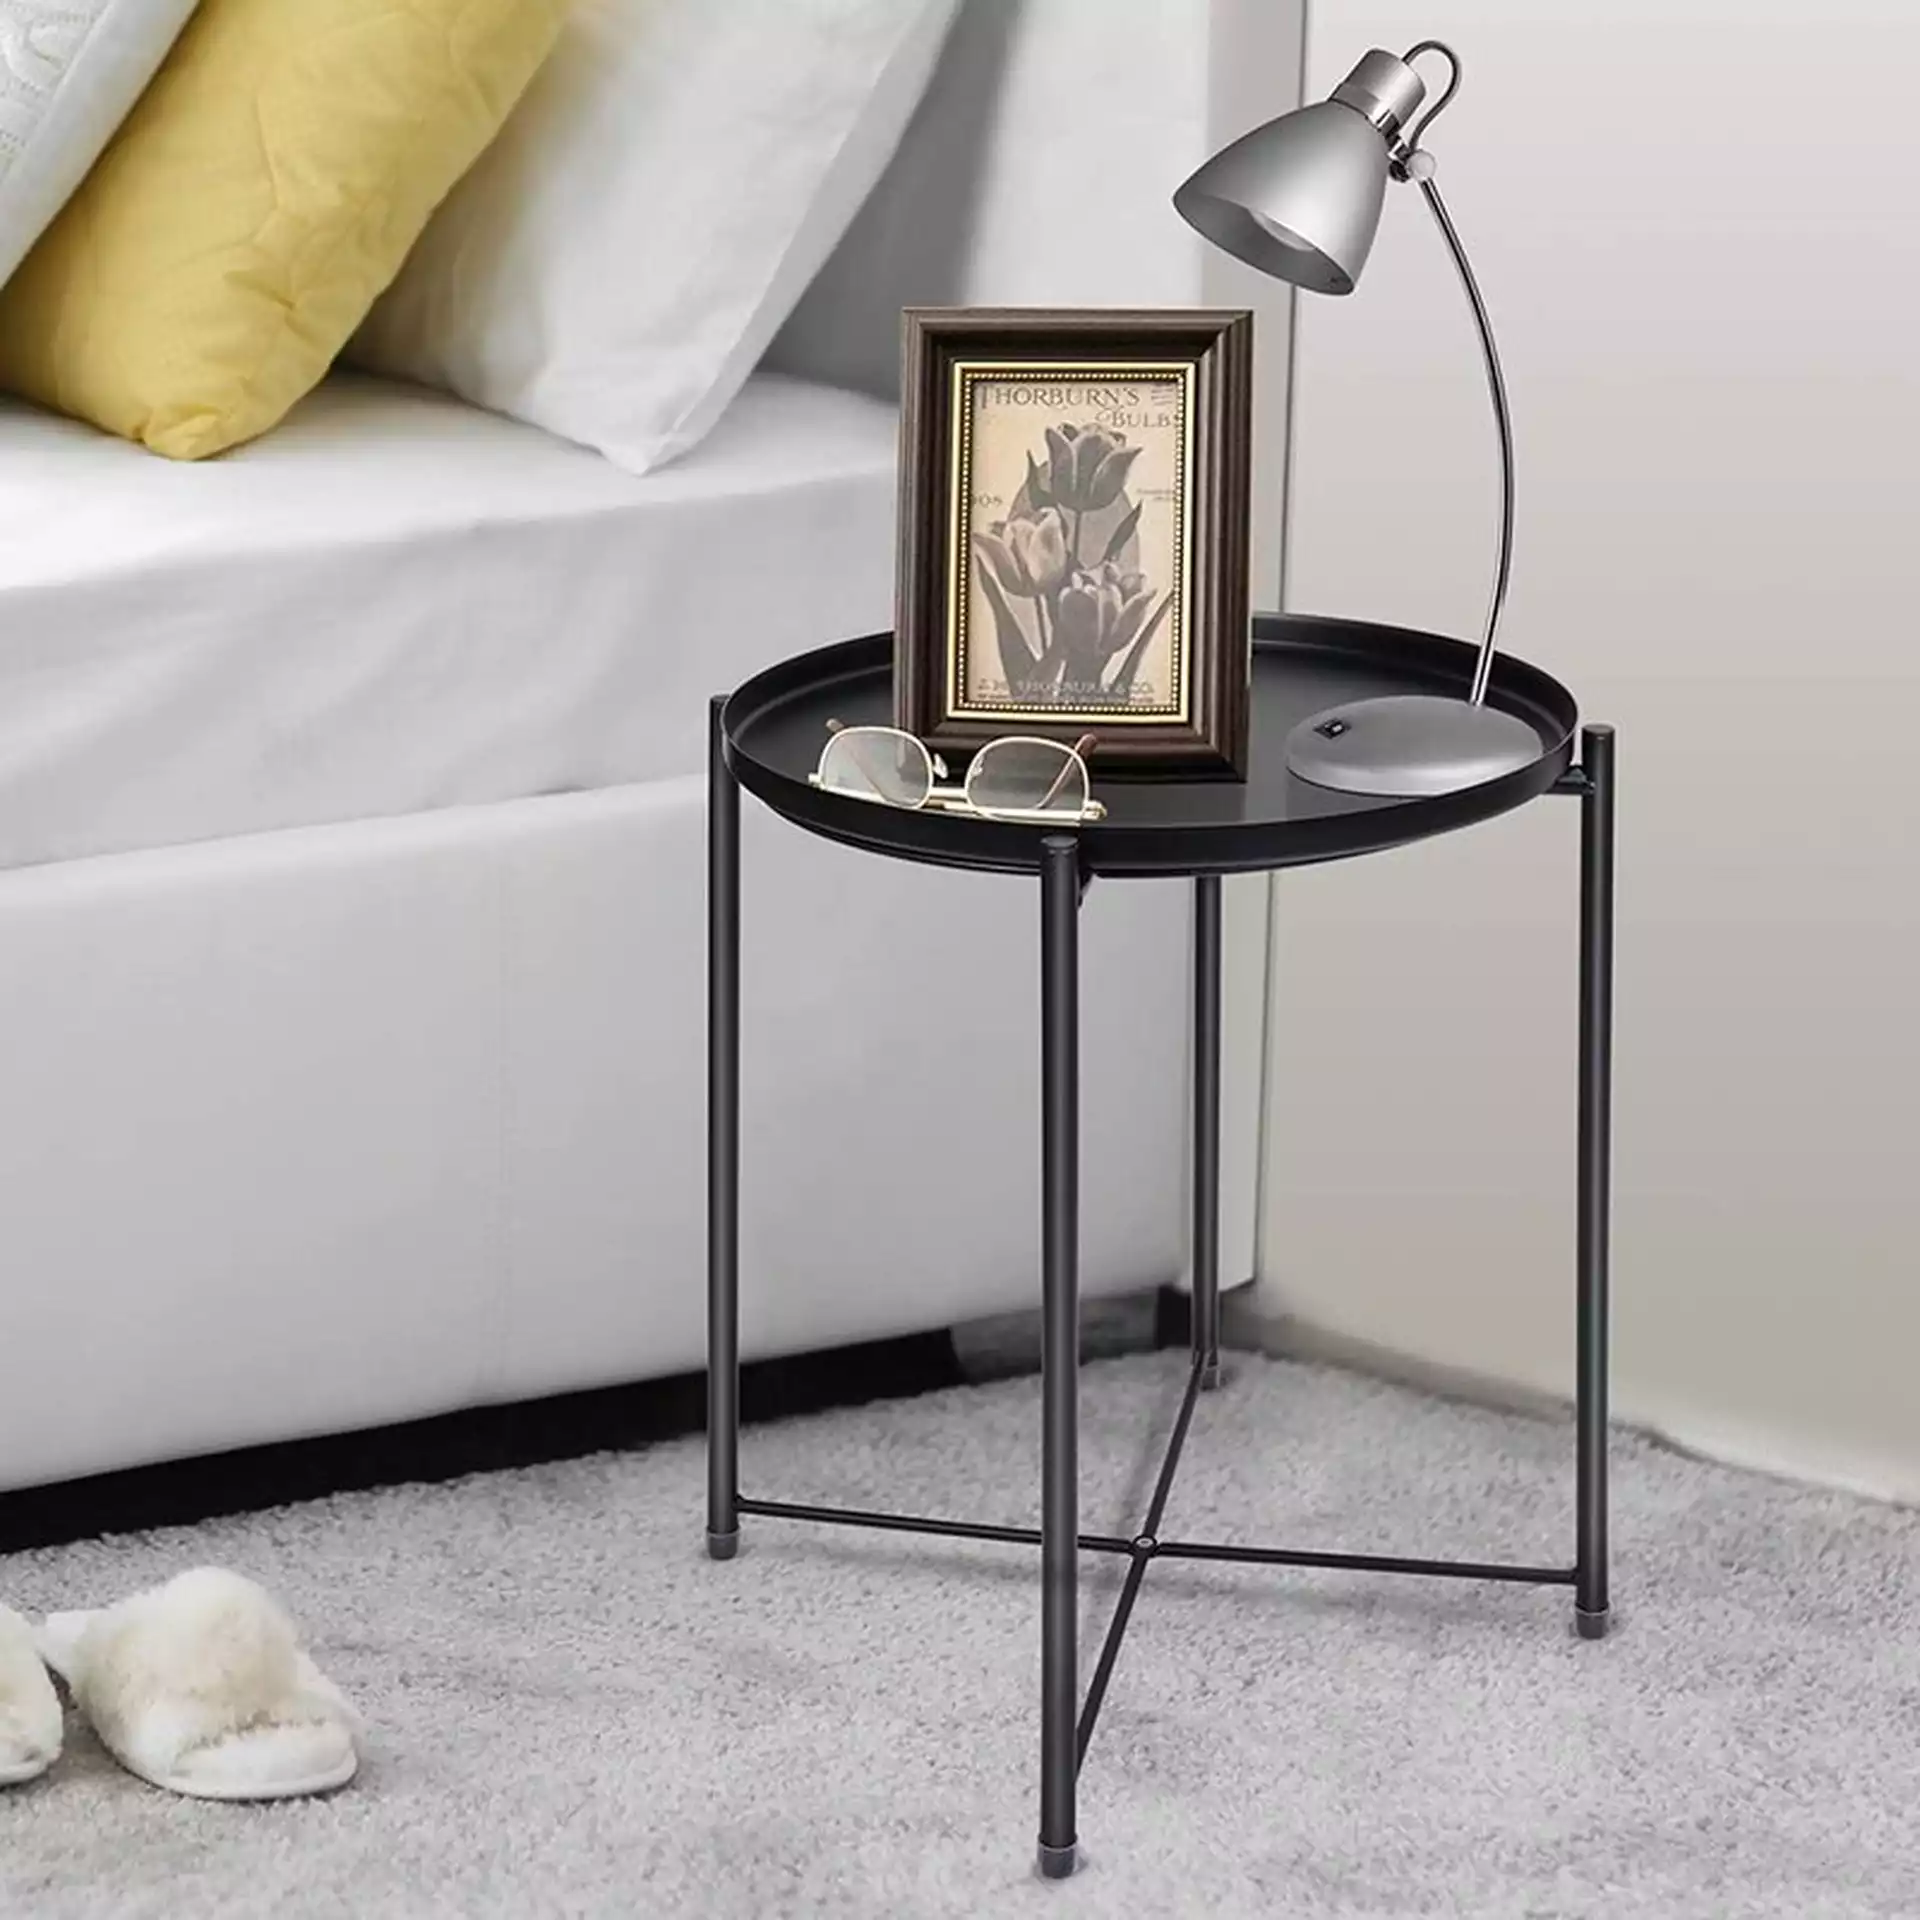 Otwell Cross Legs Tray Top End Table